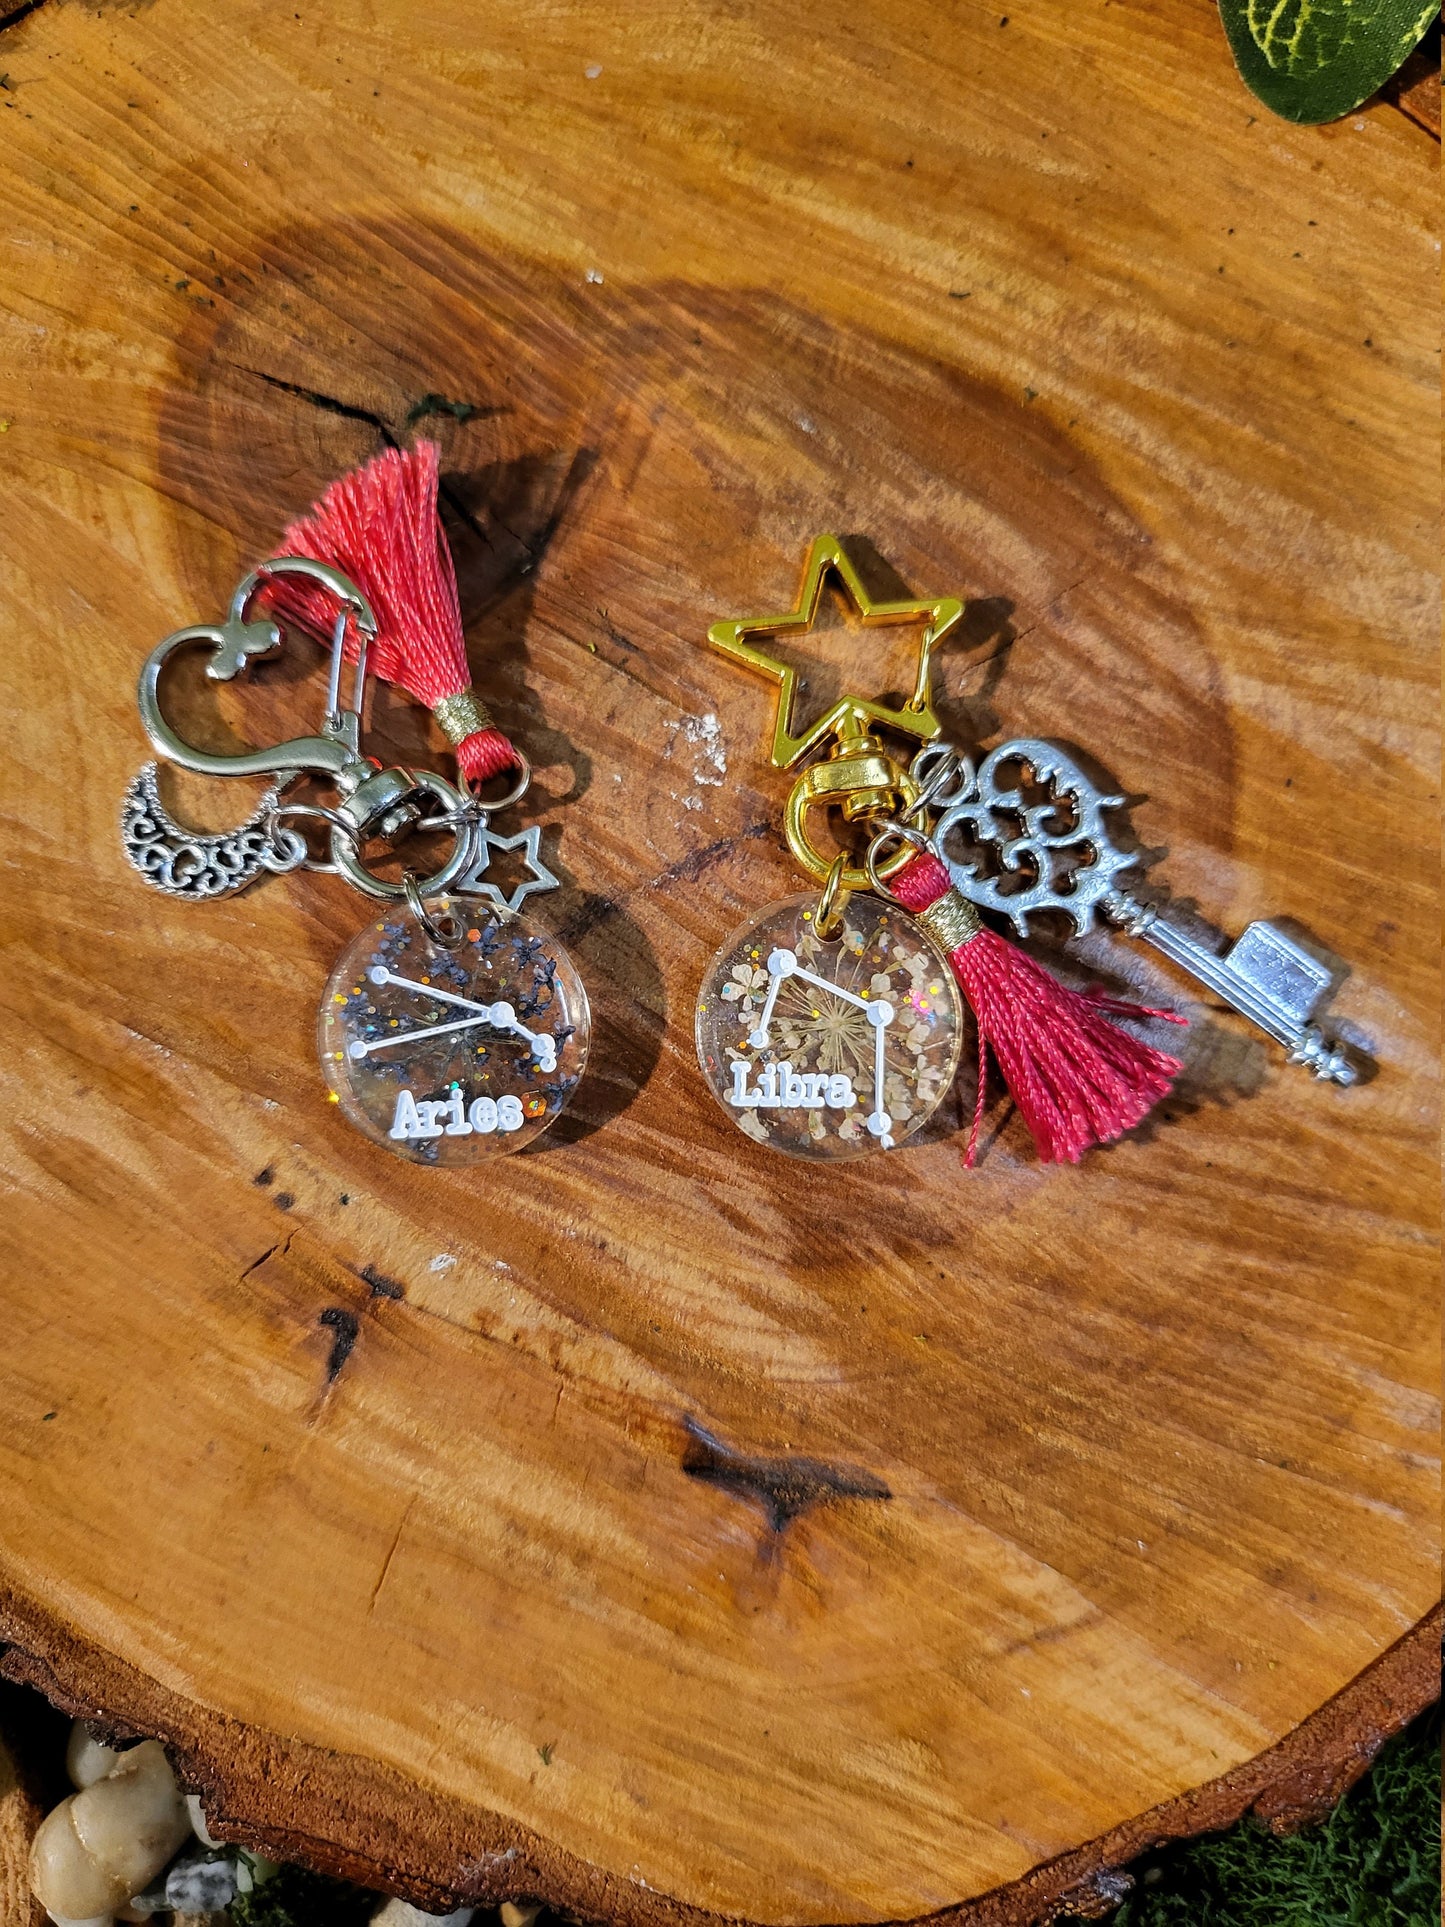 Botanical and Glitter Astrological Keychains with Charms